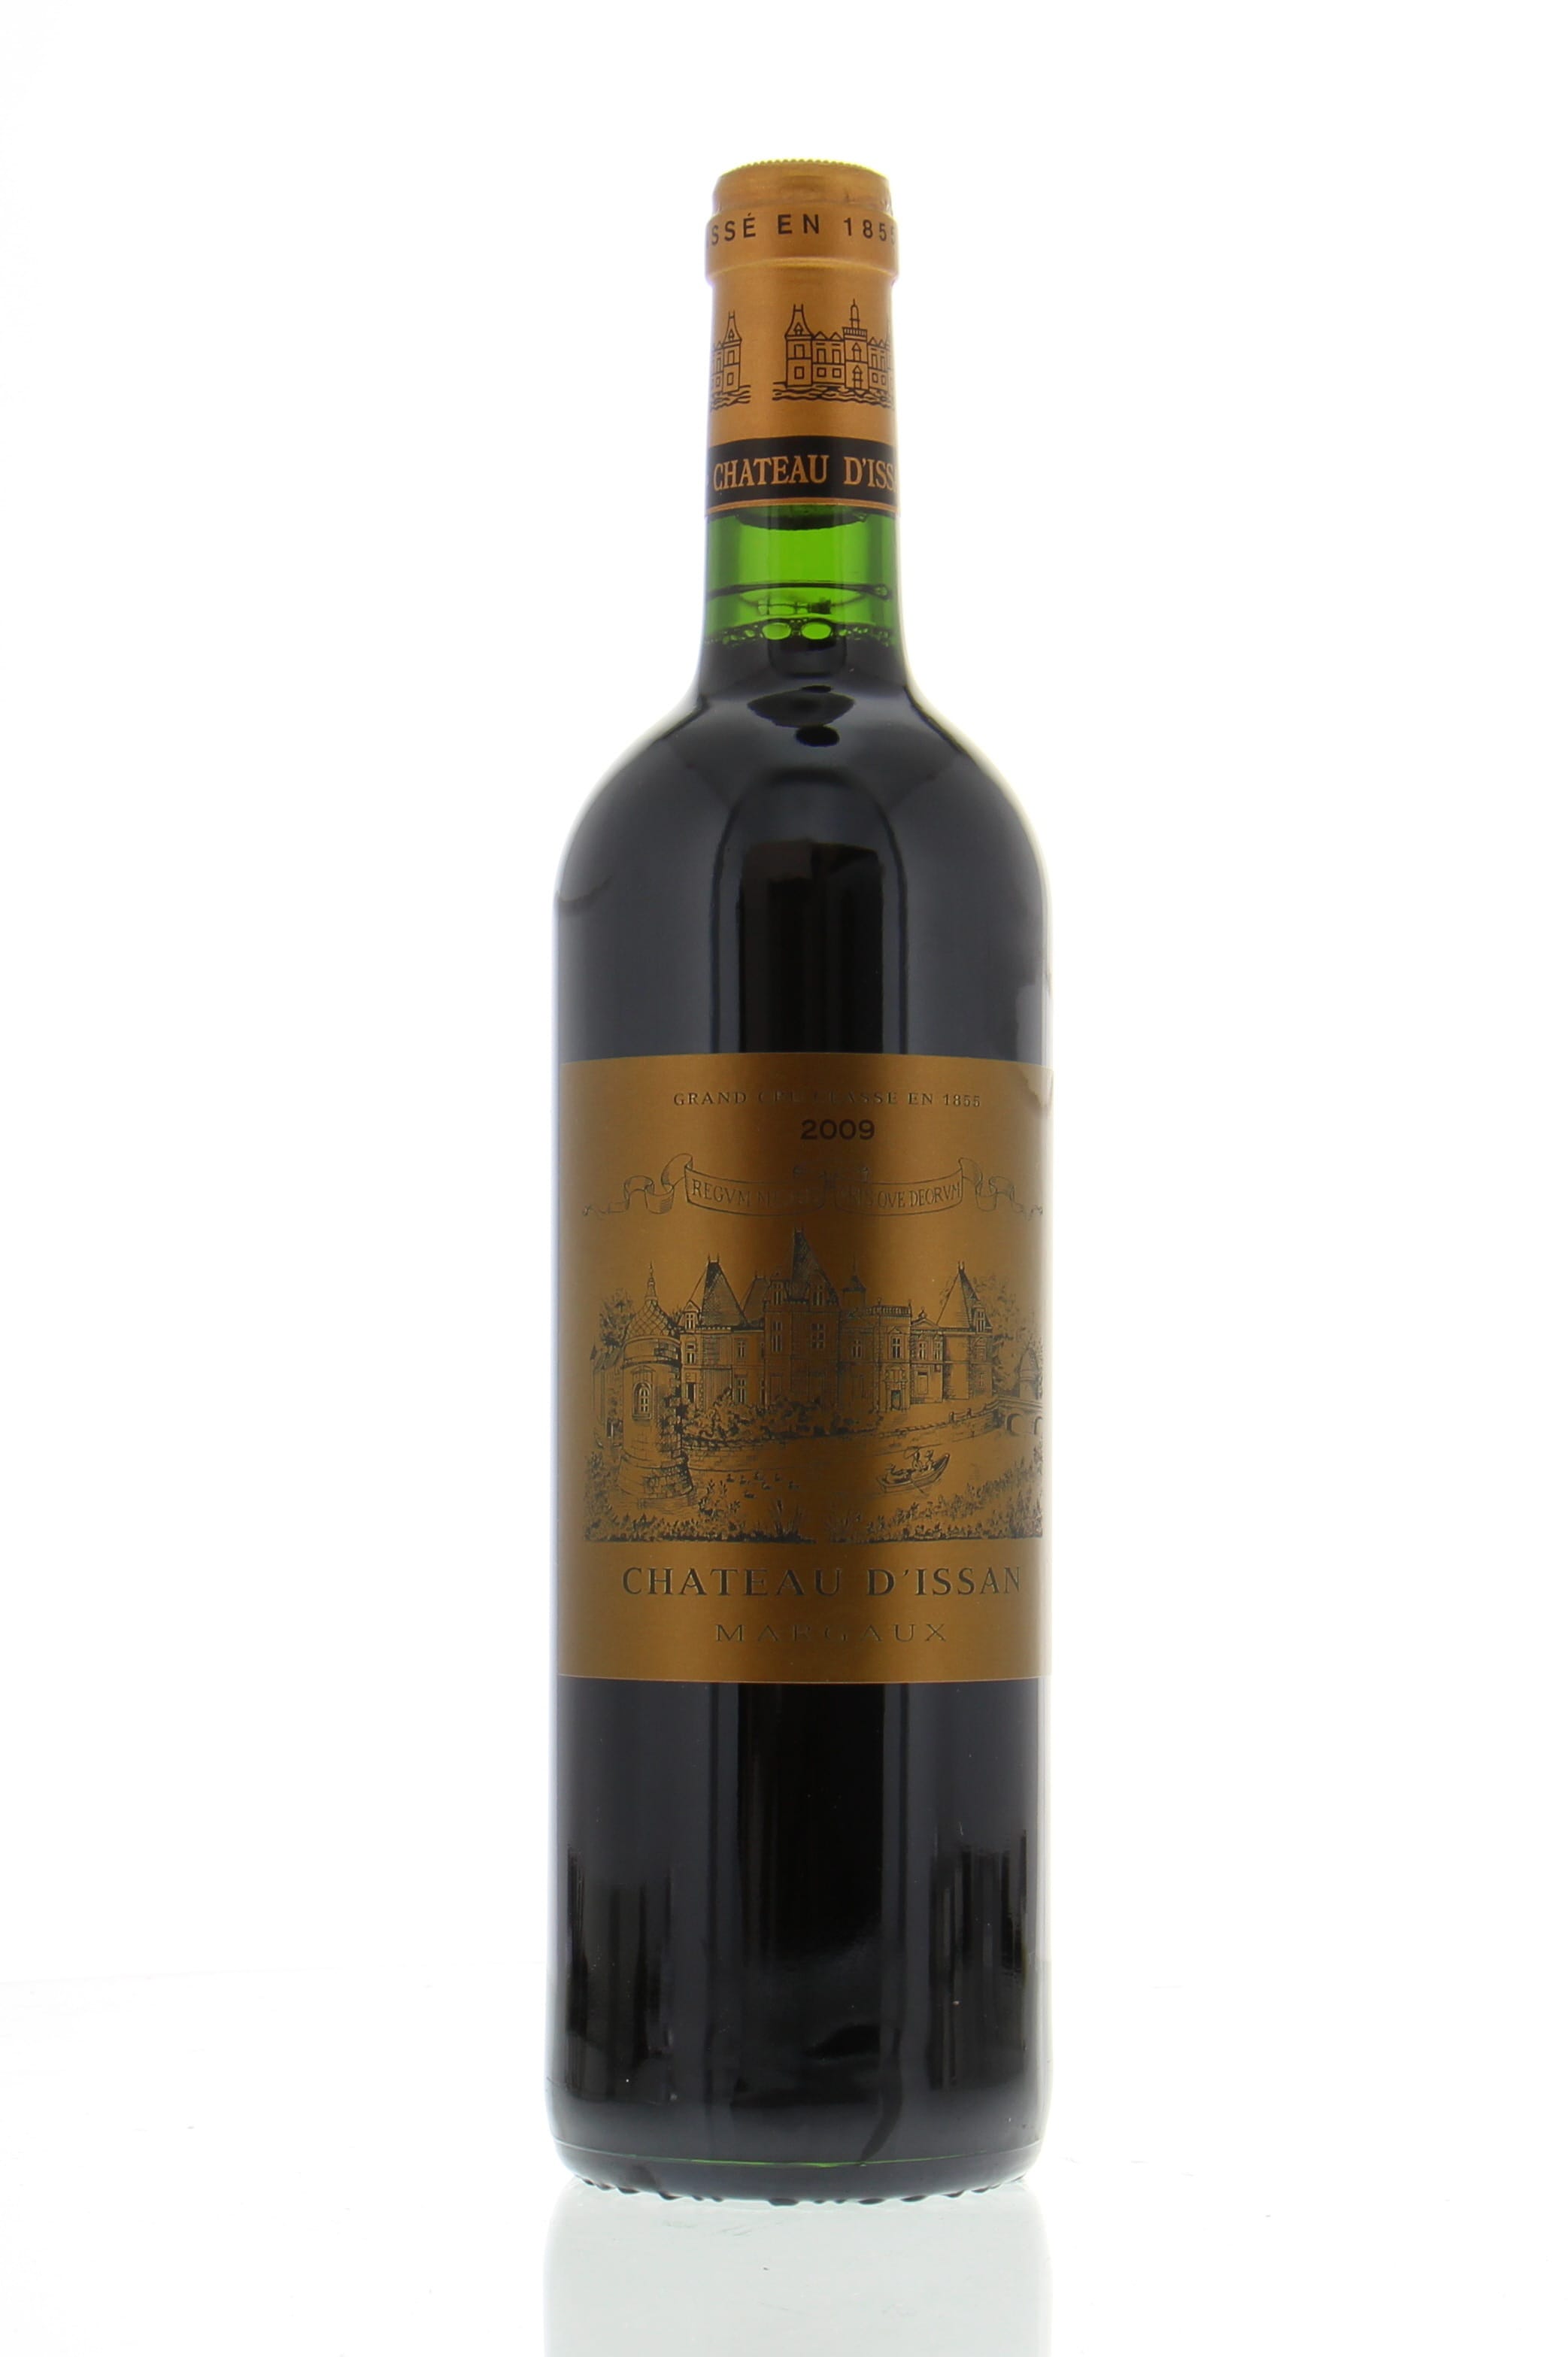 Chateau D'Issan - Chateau D'Issan 2009 Perfect